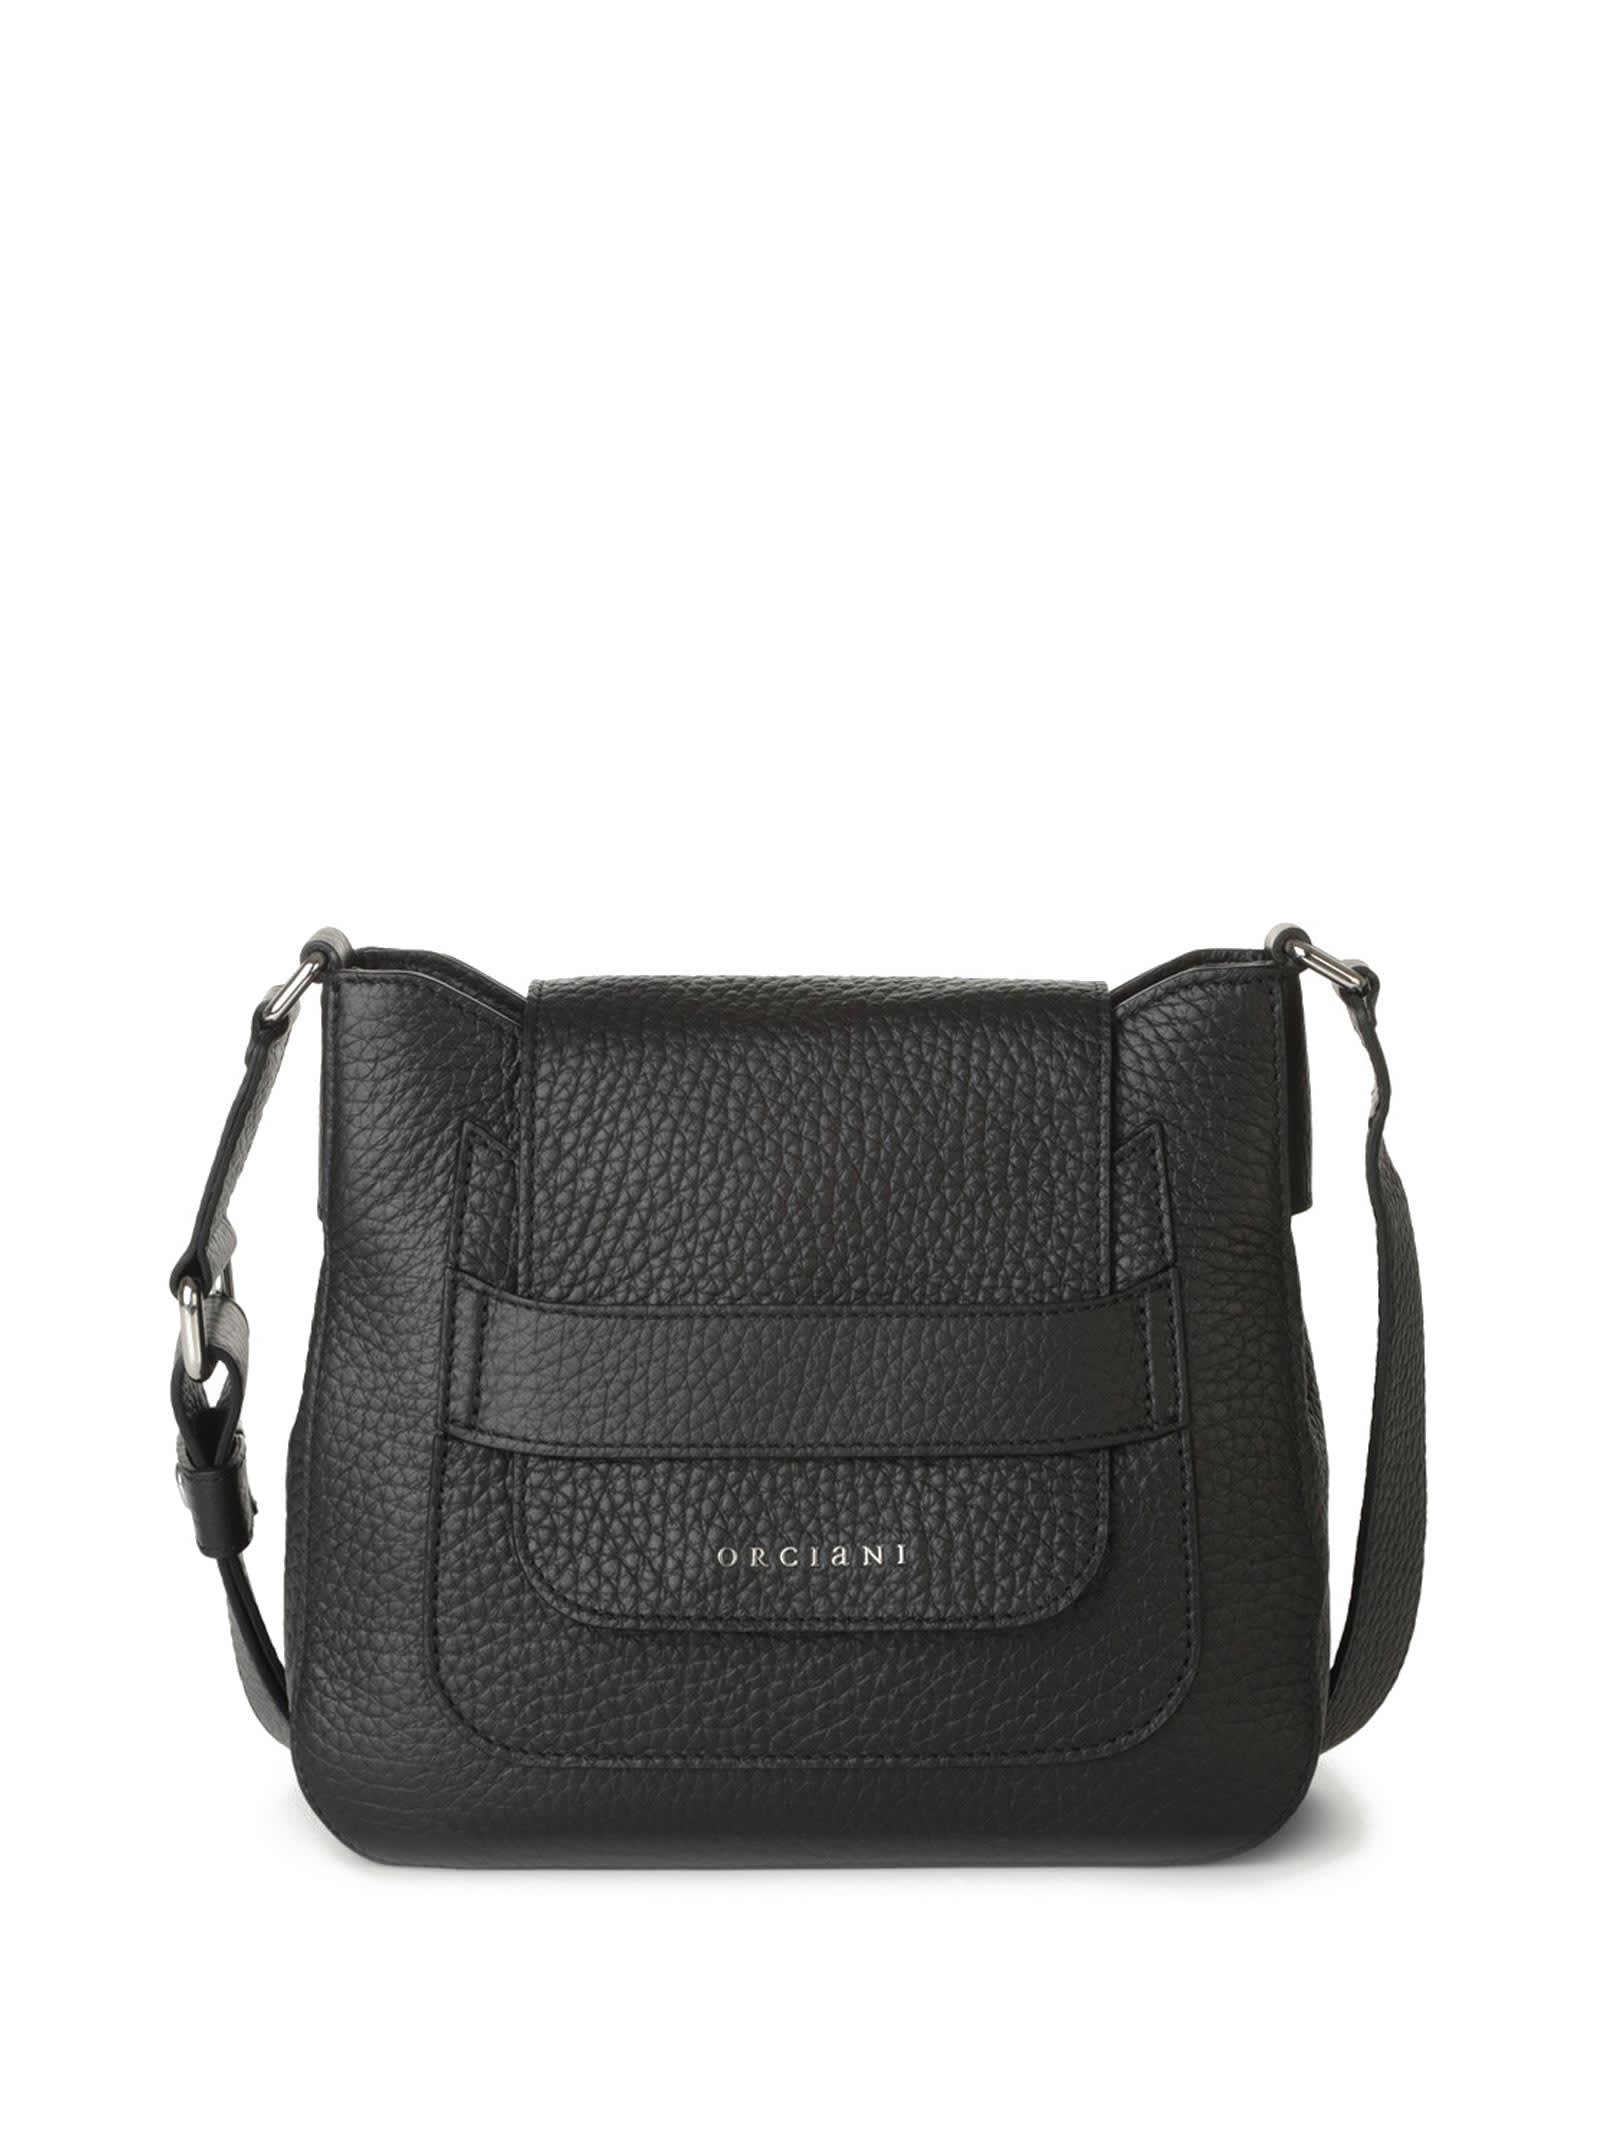 Orciani Dama Soft Midi Bag In Leather With Shoulder Strap In Nero